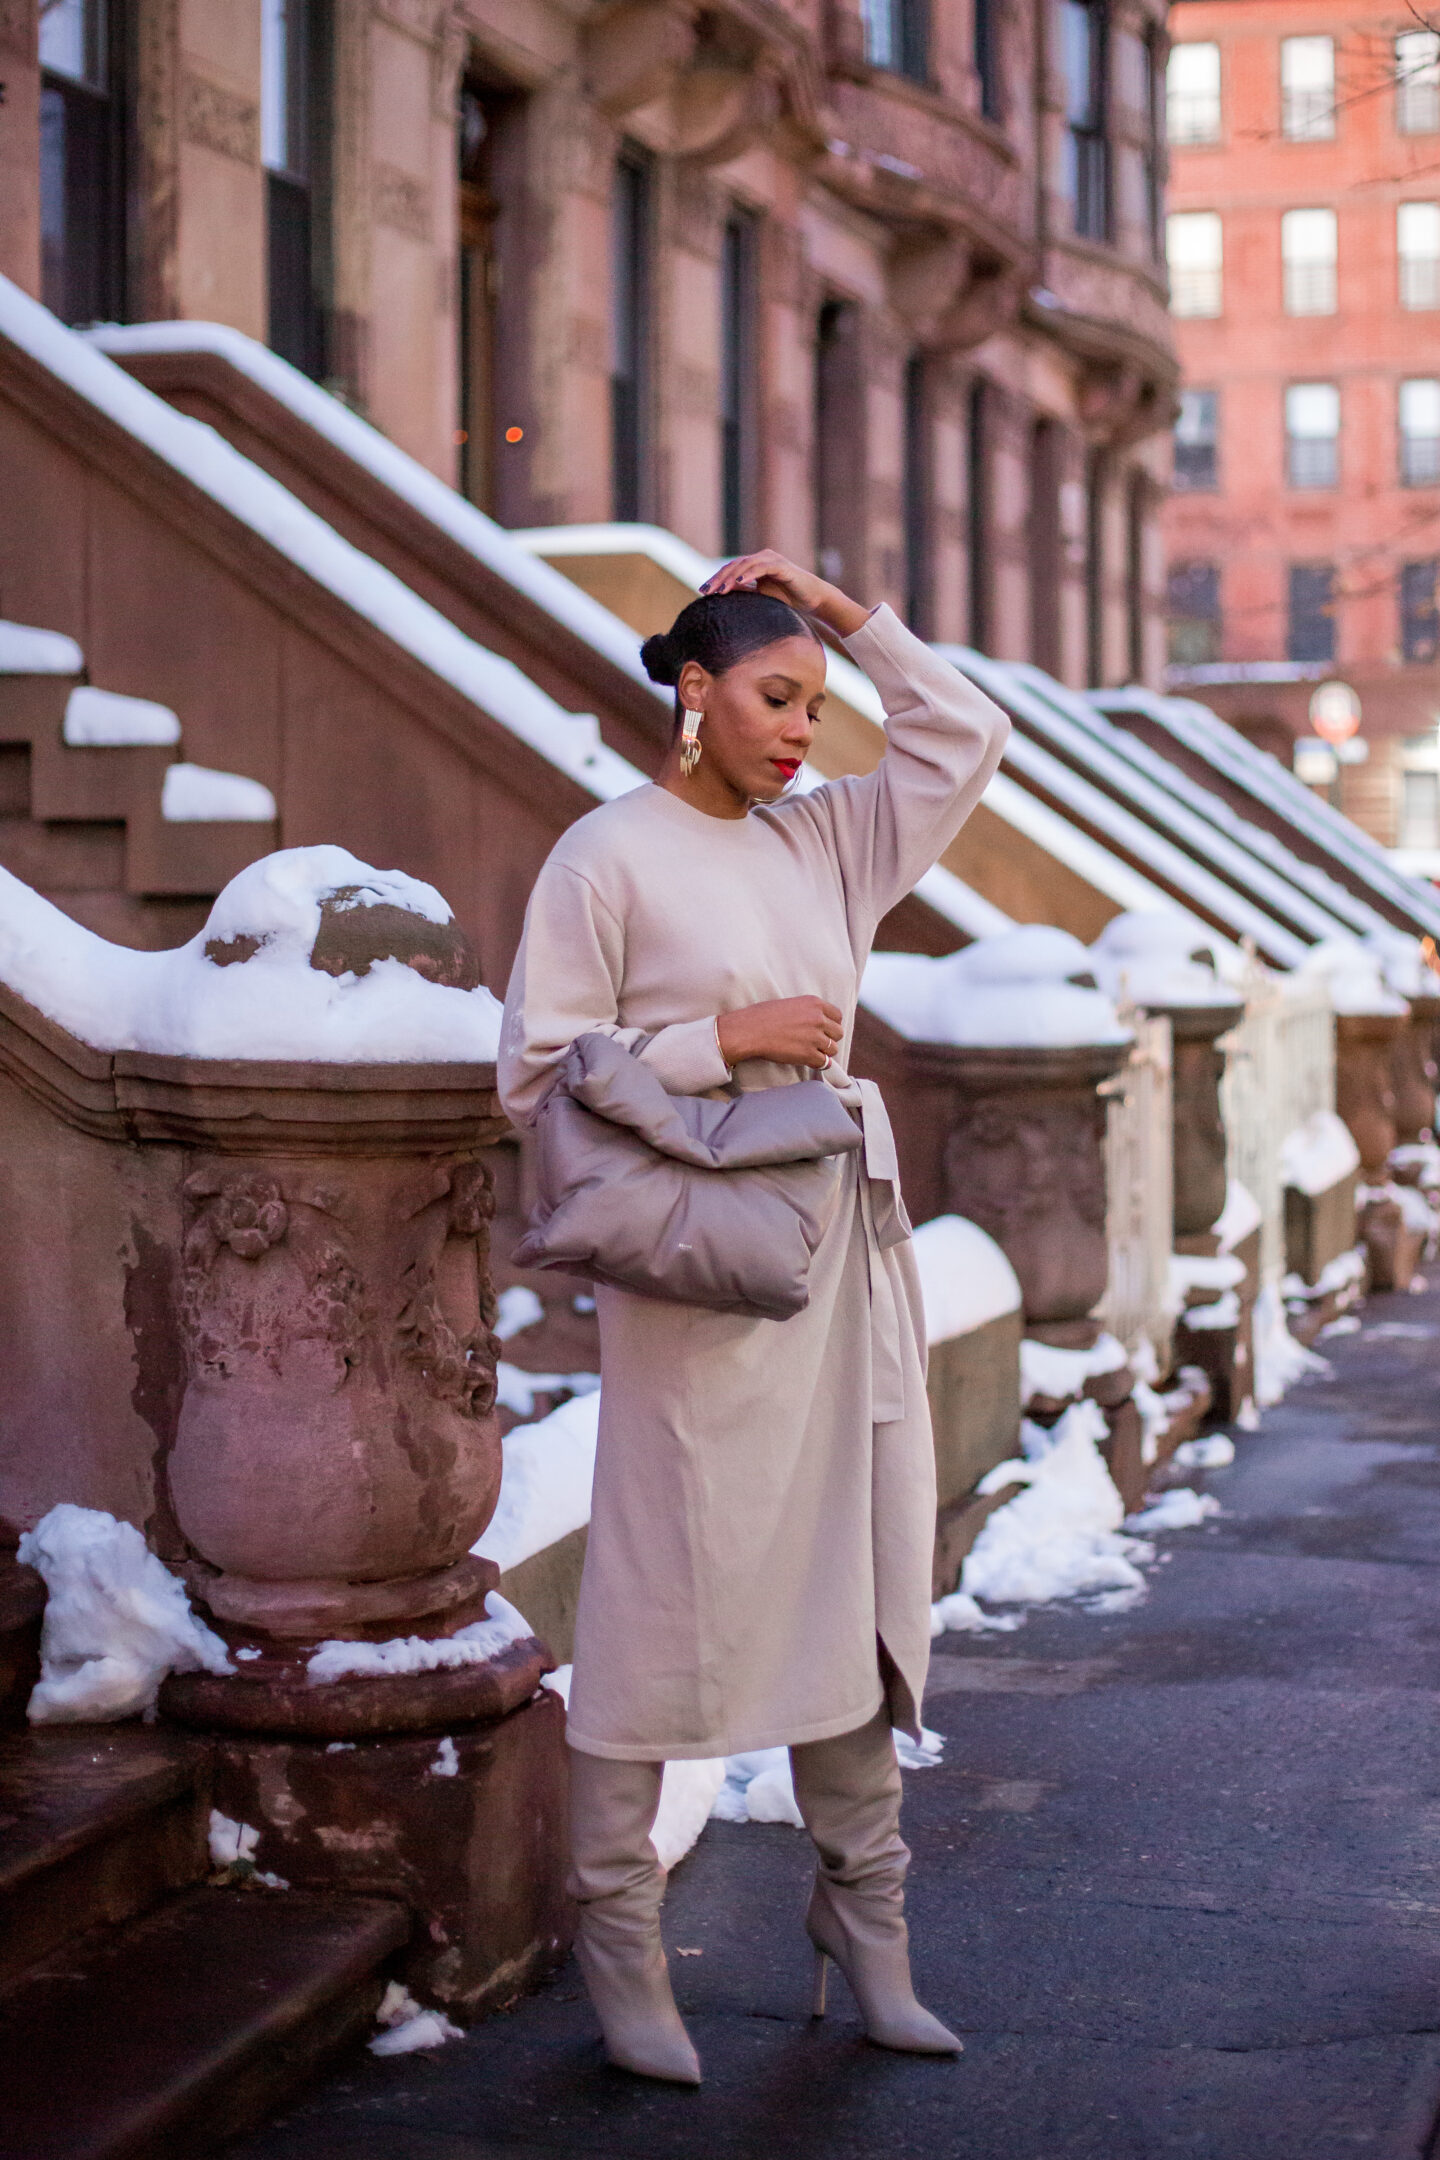 The Coolest Winter Outfits to Copy From NYC's Stylish Women  New york  winter outfit, Winter fashion outfits, Winter outfits women